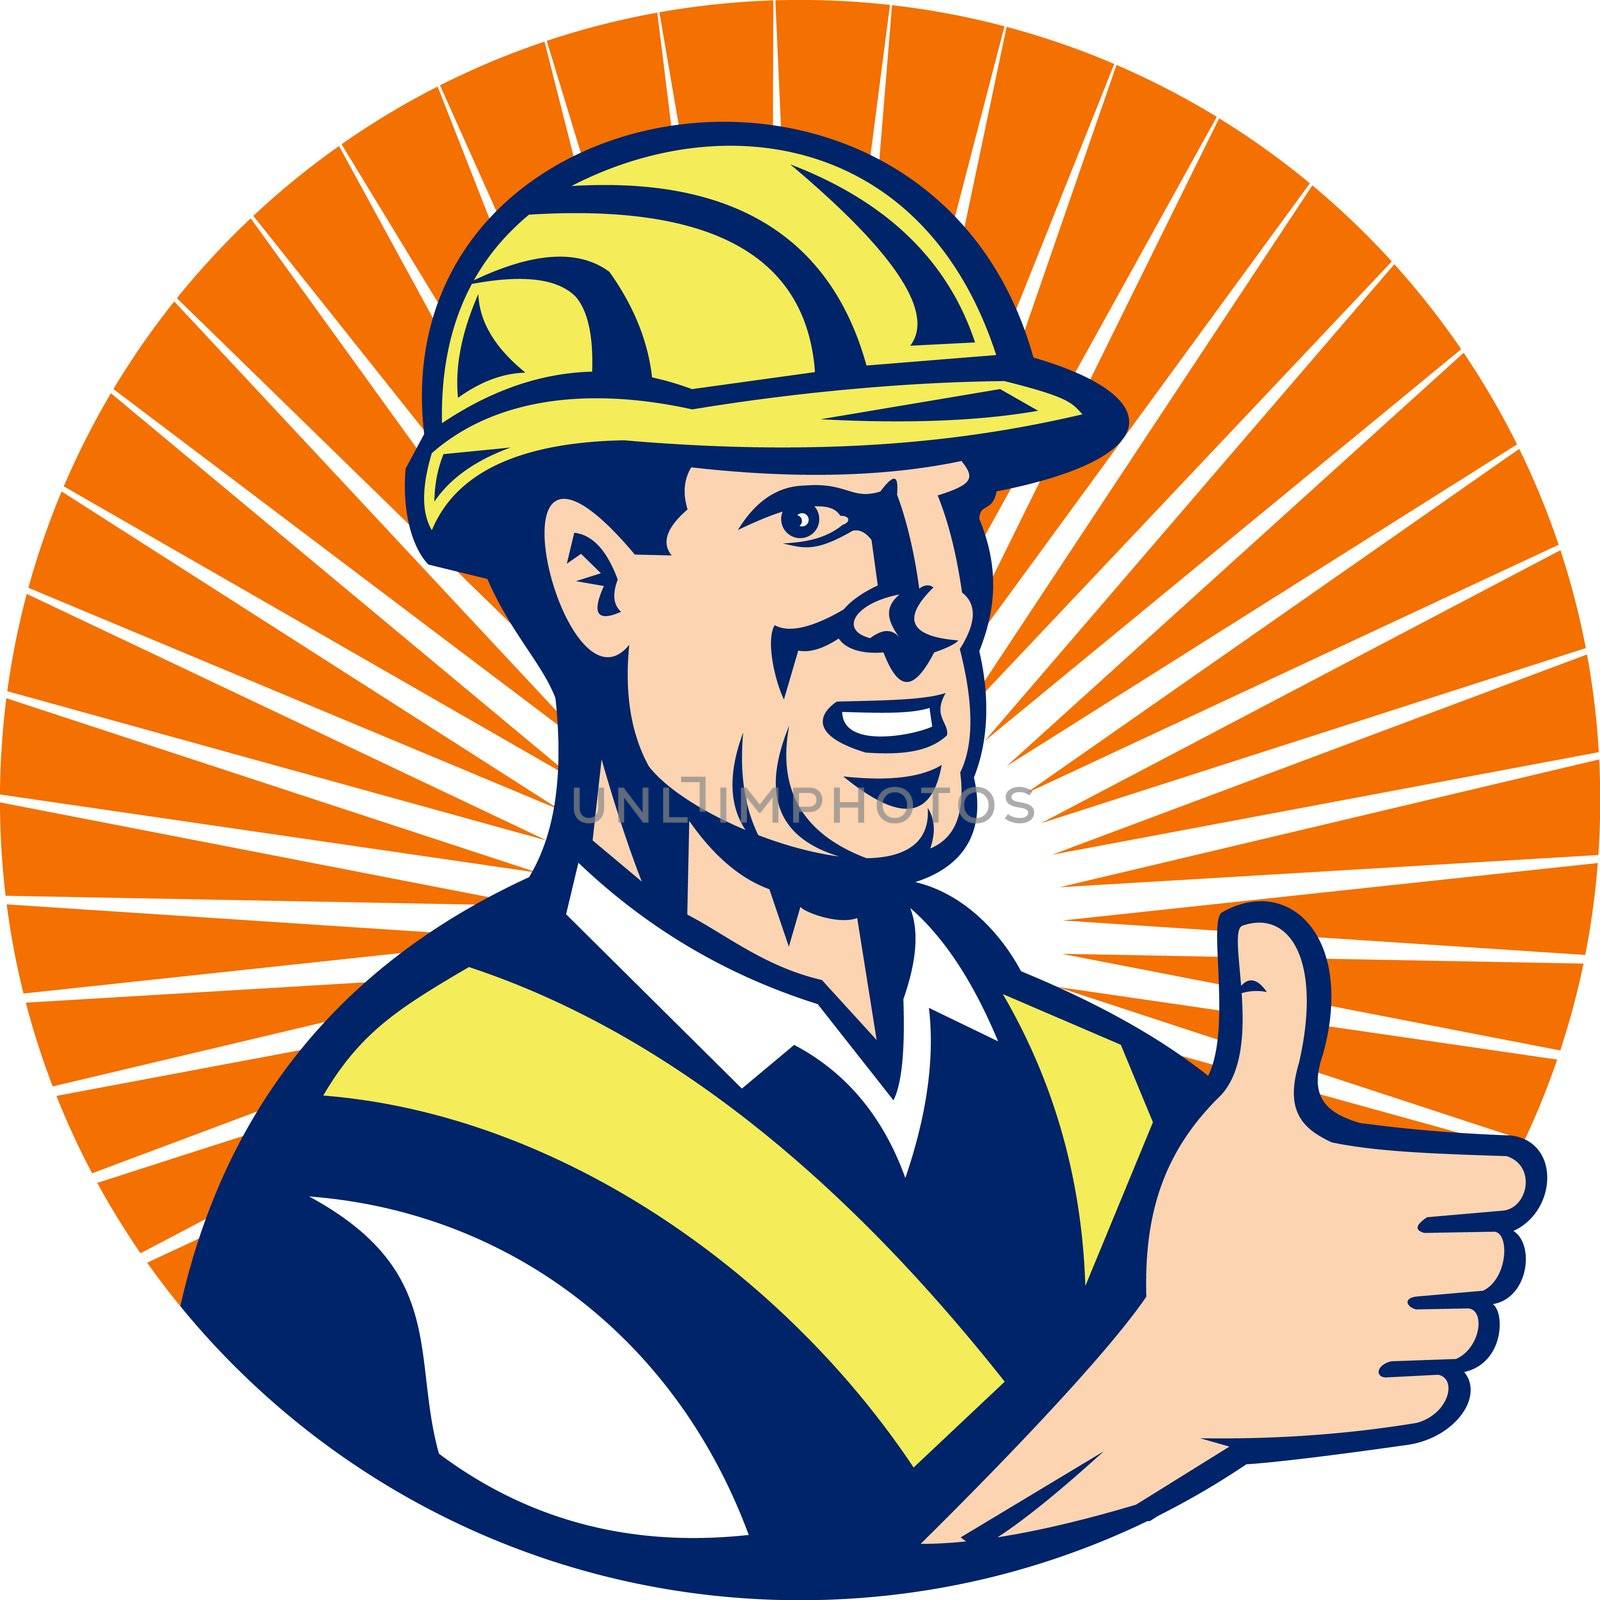 illustration of a construction worker thumbs up done in retro style set inside circle